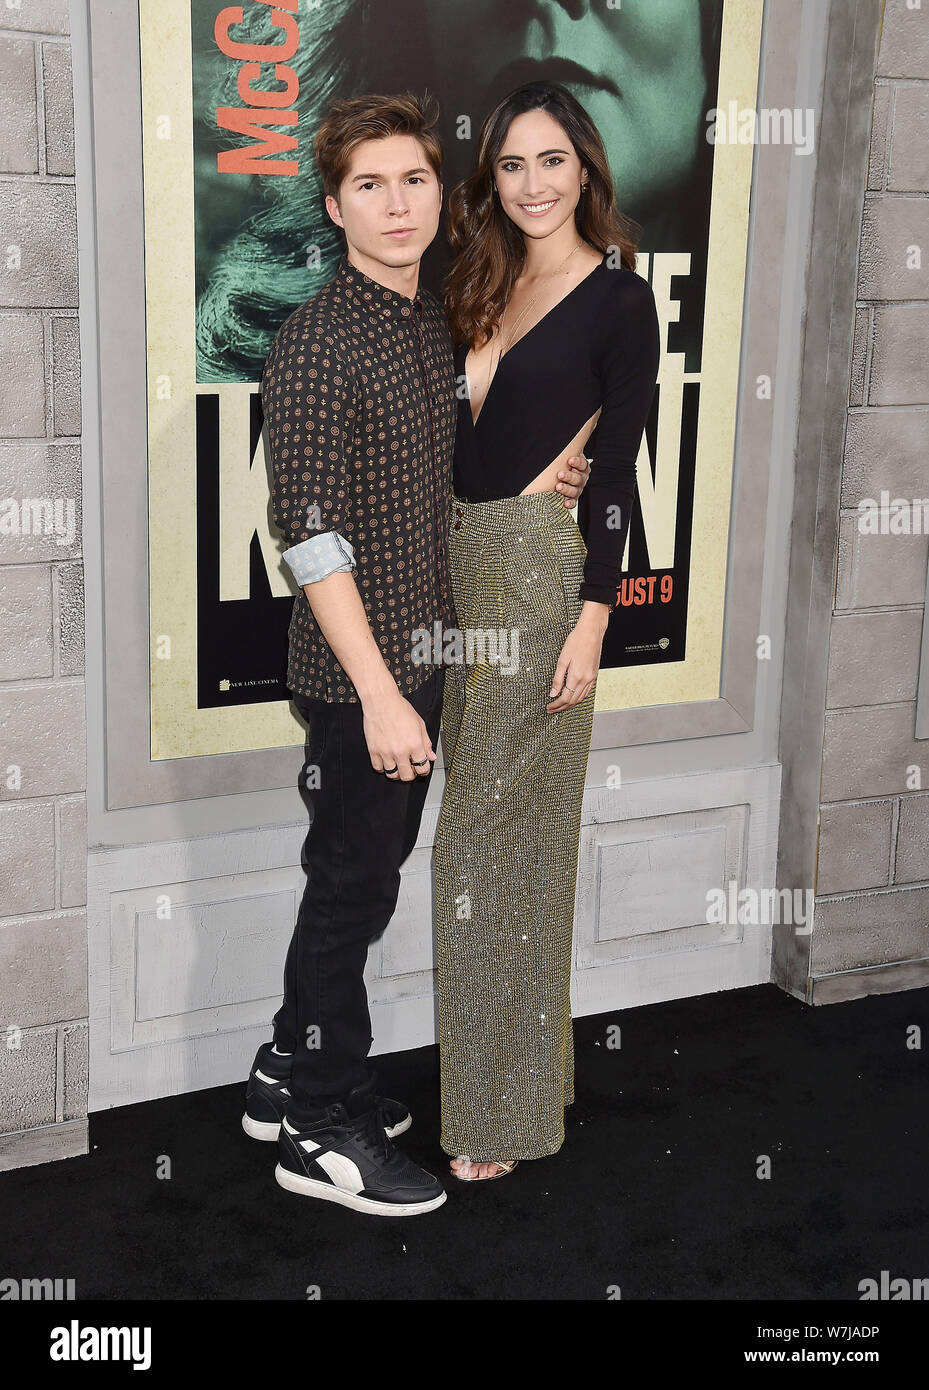 HOLLYWOOD, CA - AUGUST 05: Paul Butcher (L) and Marina Jacoby arrive at the Premiere Of Warner Bros Pictures' 'The Kitchen' Premiere Of Warner Bros Pictures' 'The Kitchen' at TCL Chinese Theatre on August 05, 2019 in Hollywood, California. Stock Photo